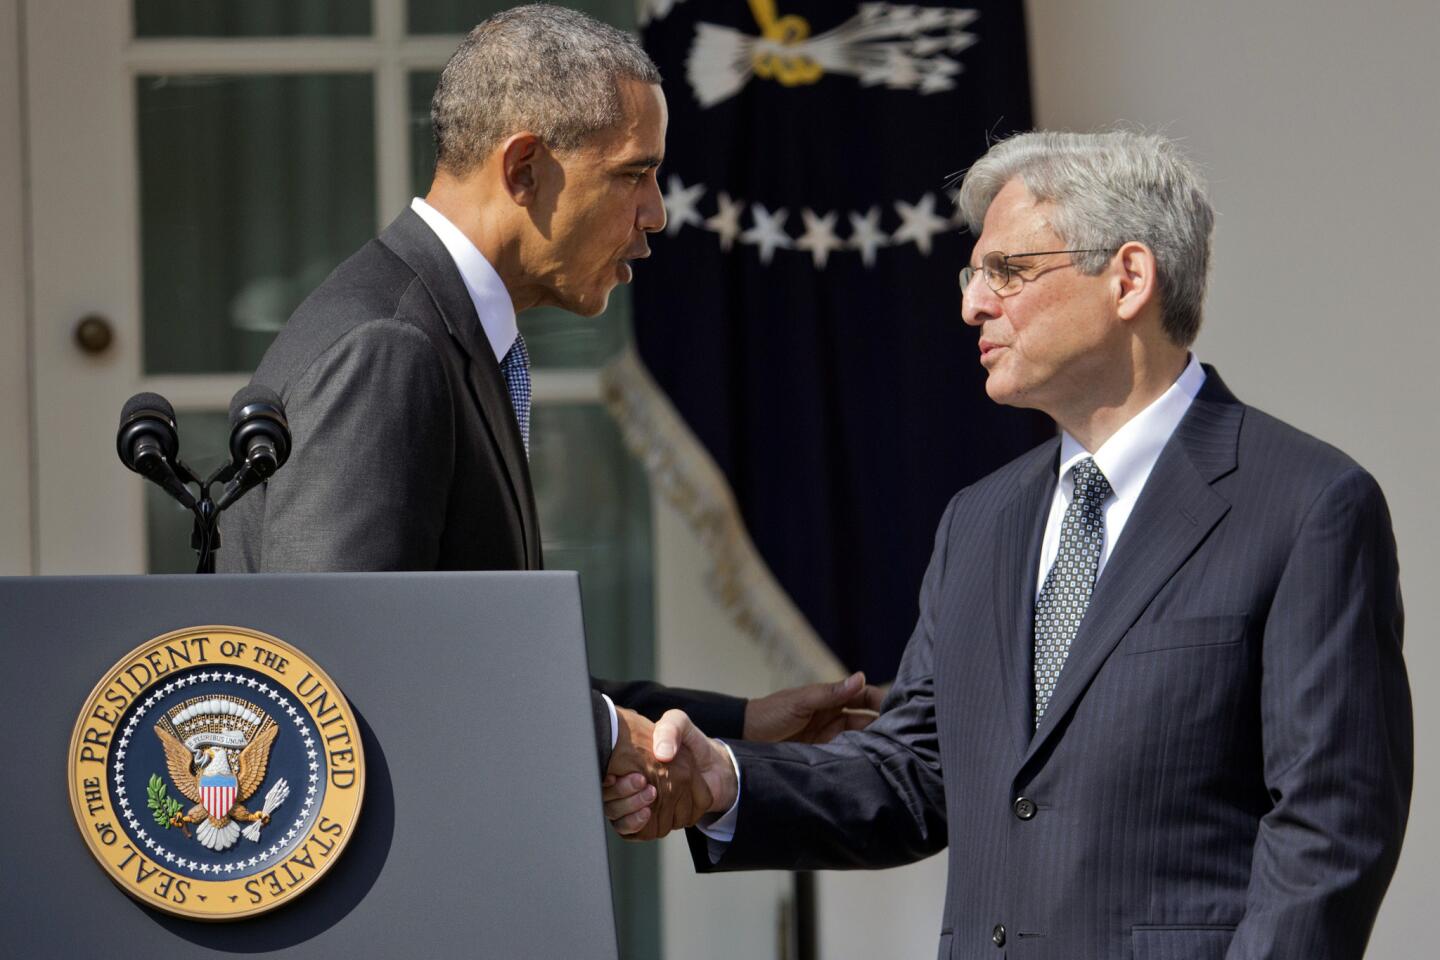 Federal appeals court Judge Merrick Garland, right, shakes hands with President Barack Obama as he is introduced as Obama's nominee for the Supreme Court on March 16, 2016.